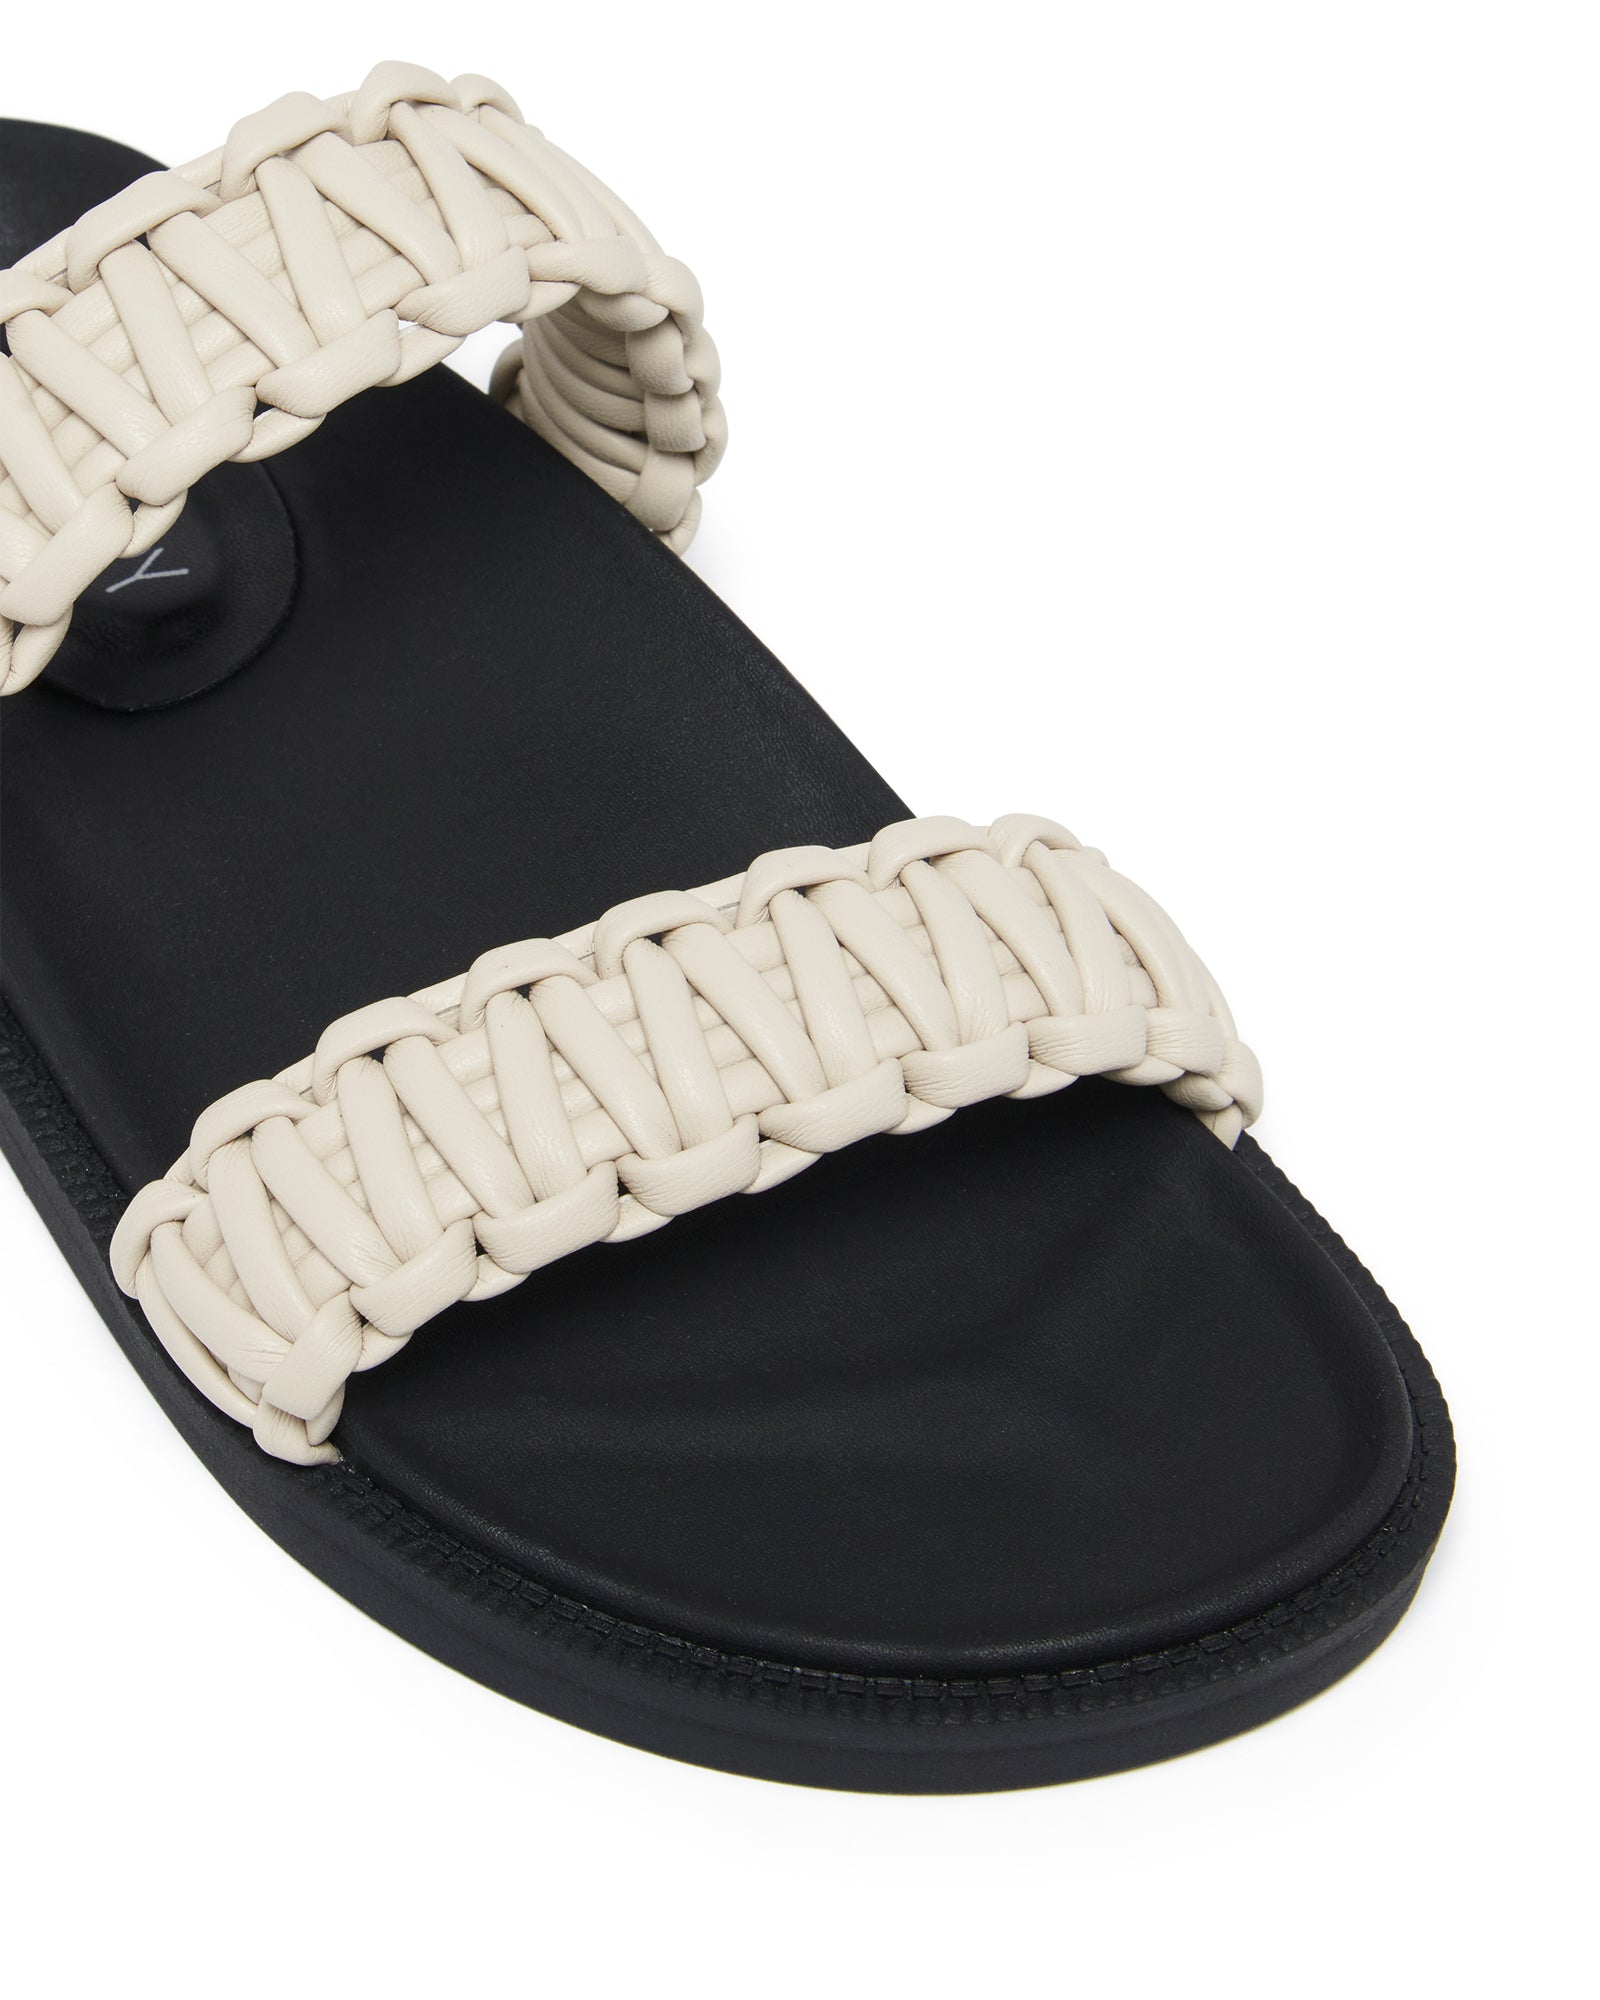 Therapy Shoes Edie Bone | Women's Sandals | Slides | Flats | Woven